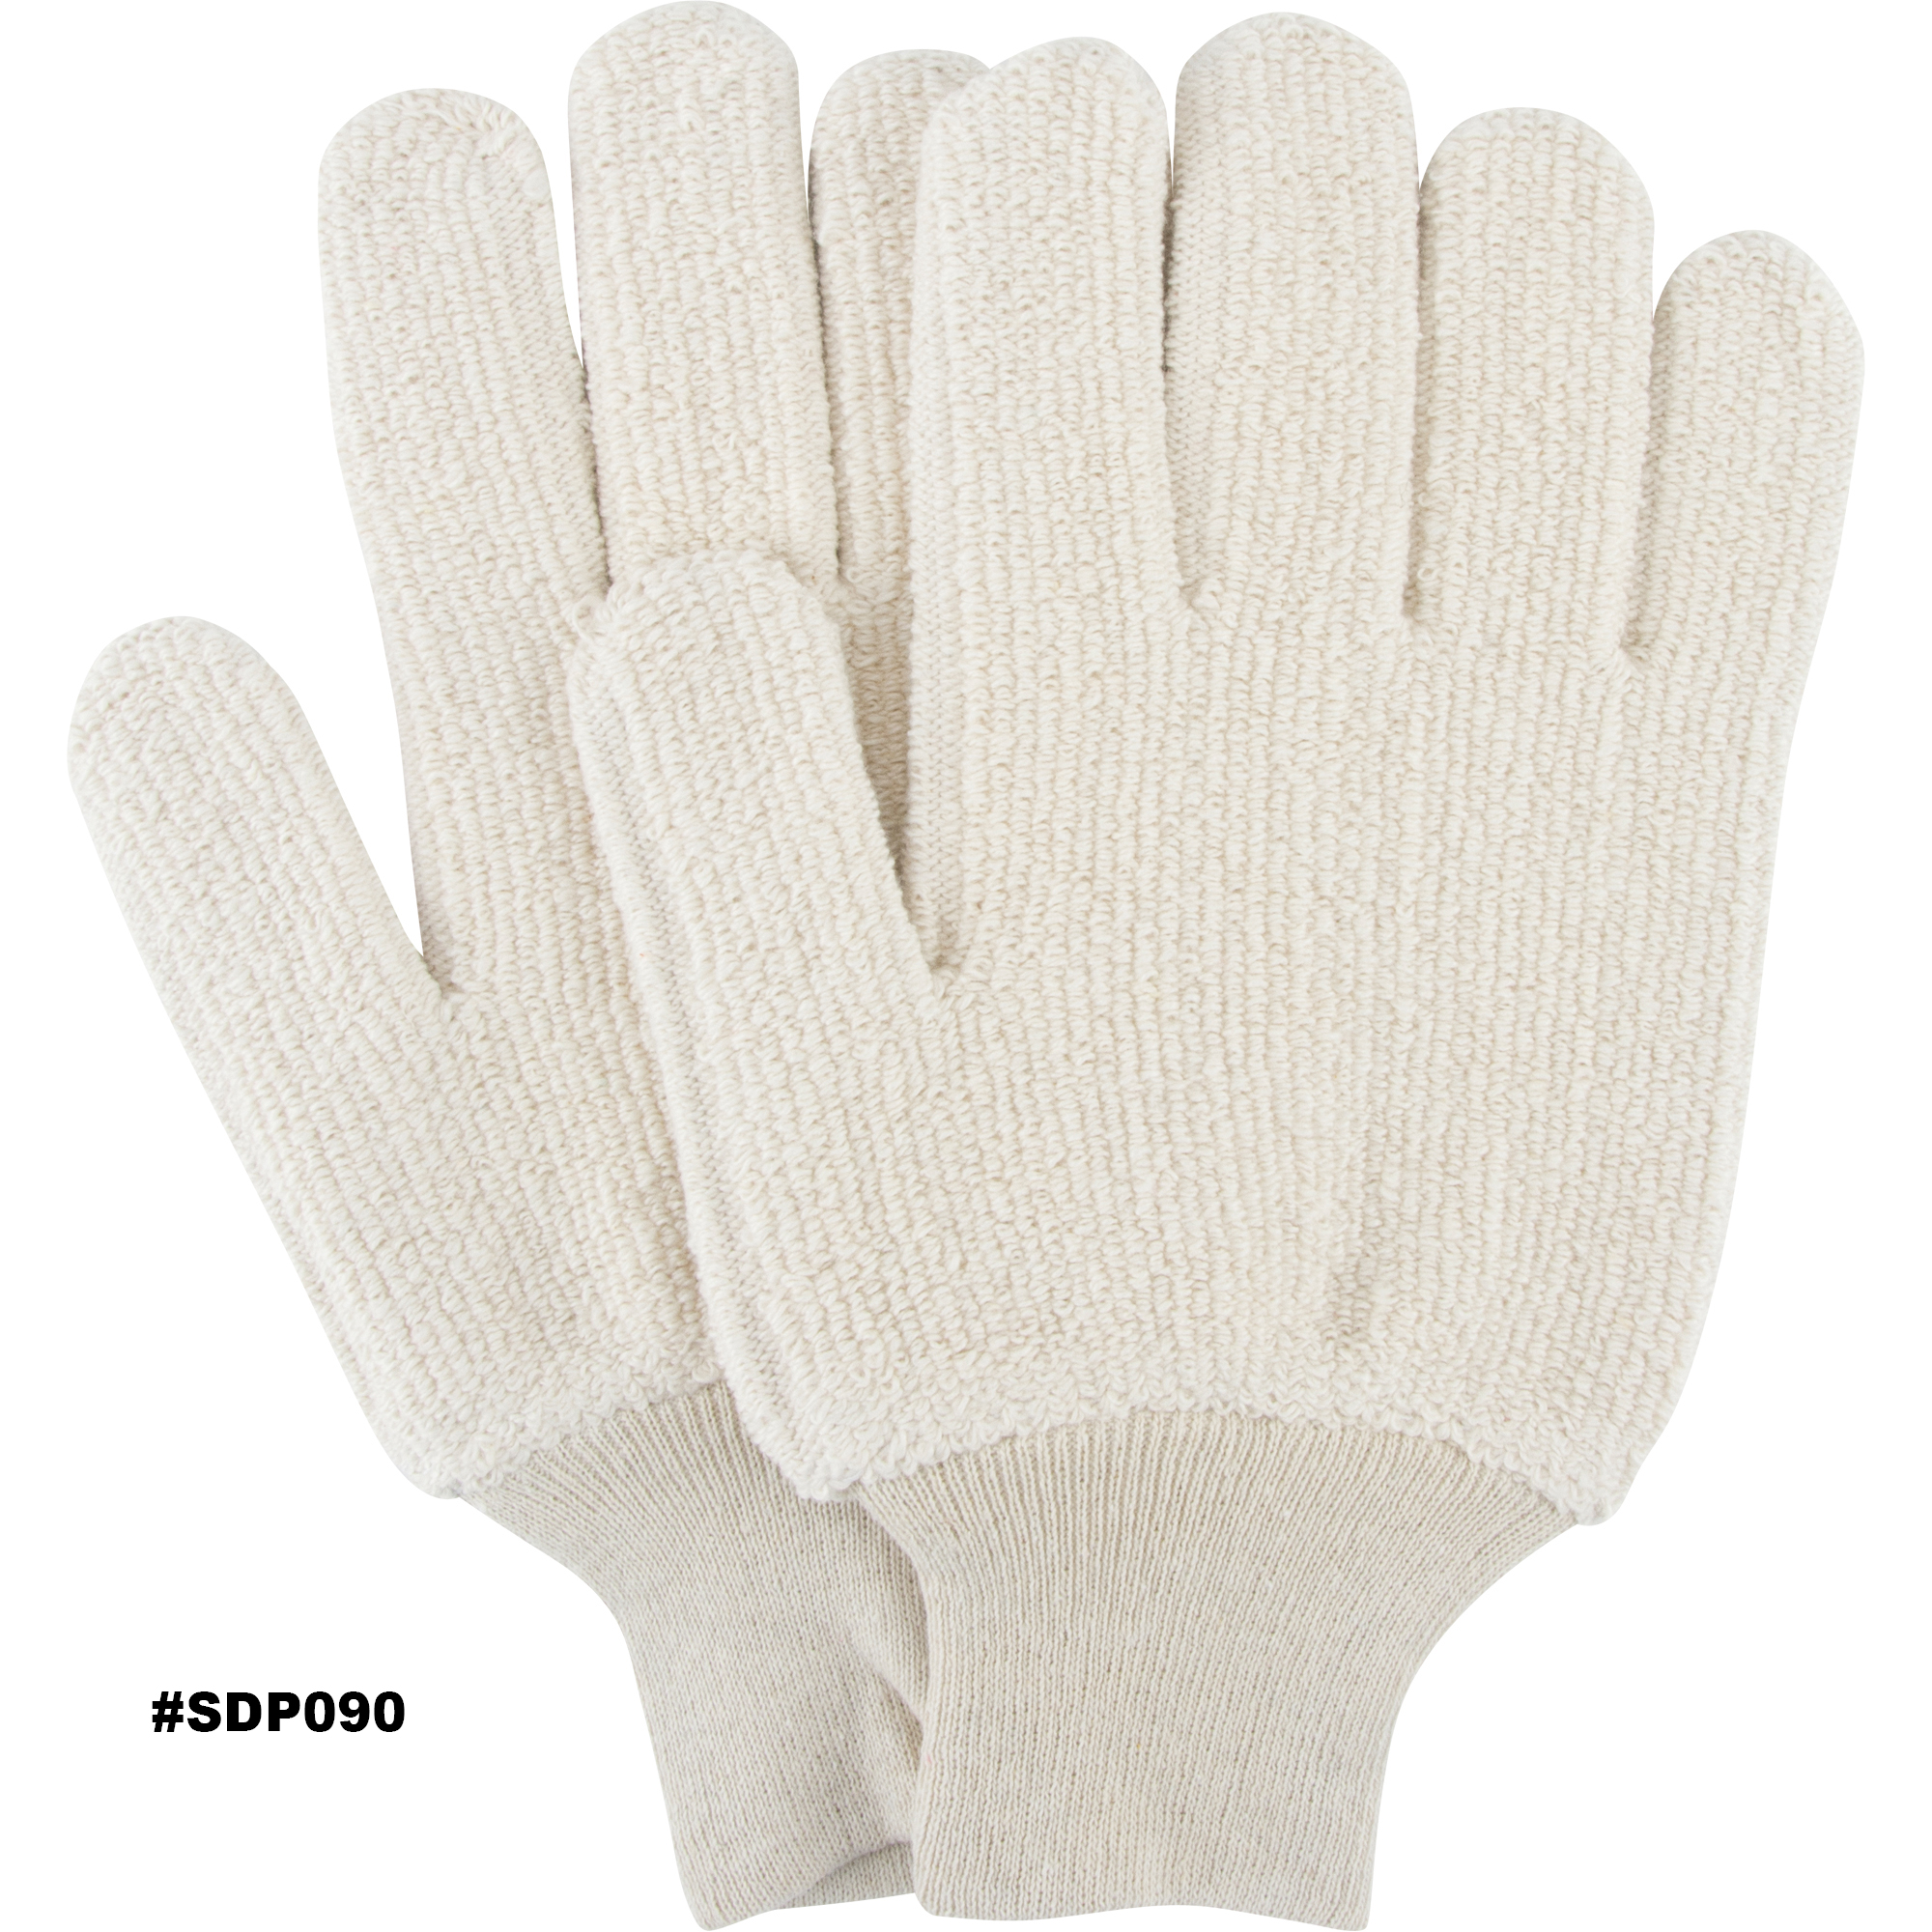 Zenith Heat-Resistant Gloves, Terry Cloth, Large, Protects Up To 212° F (100° C) Model: SDP090